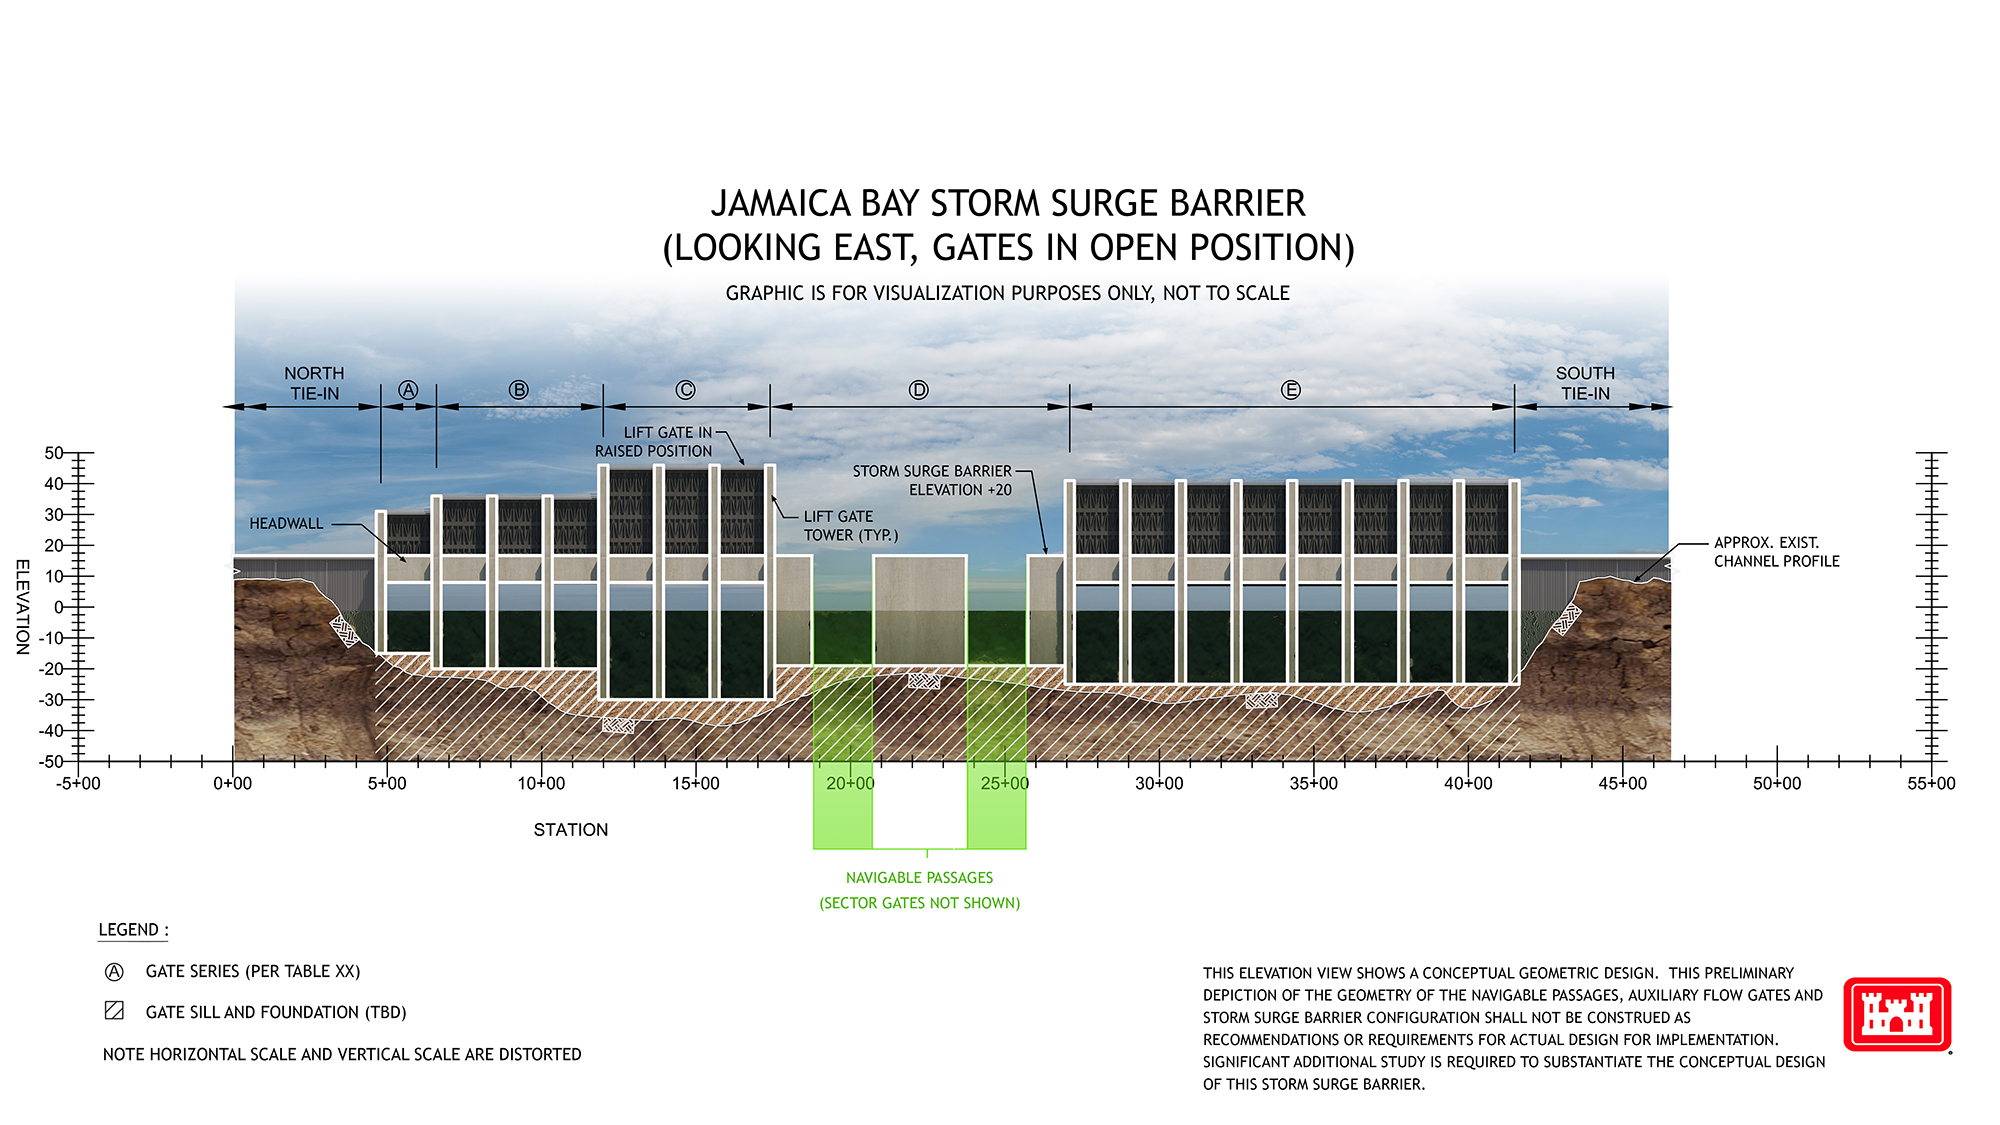 Jamaica Bay Section. (Graphic courtesy of the U.S. Army Corps of Engineers)